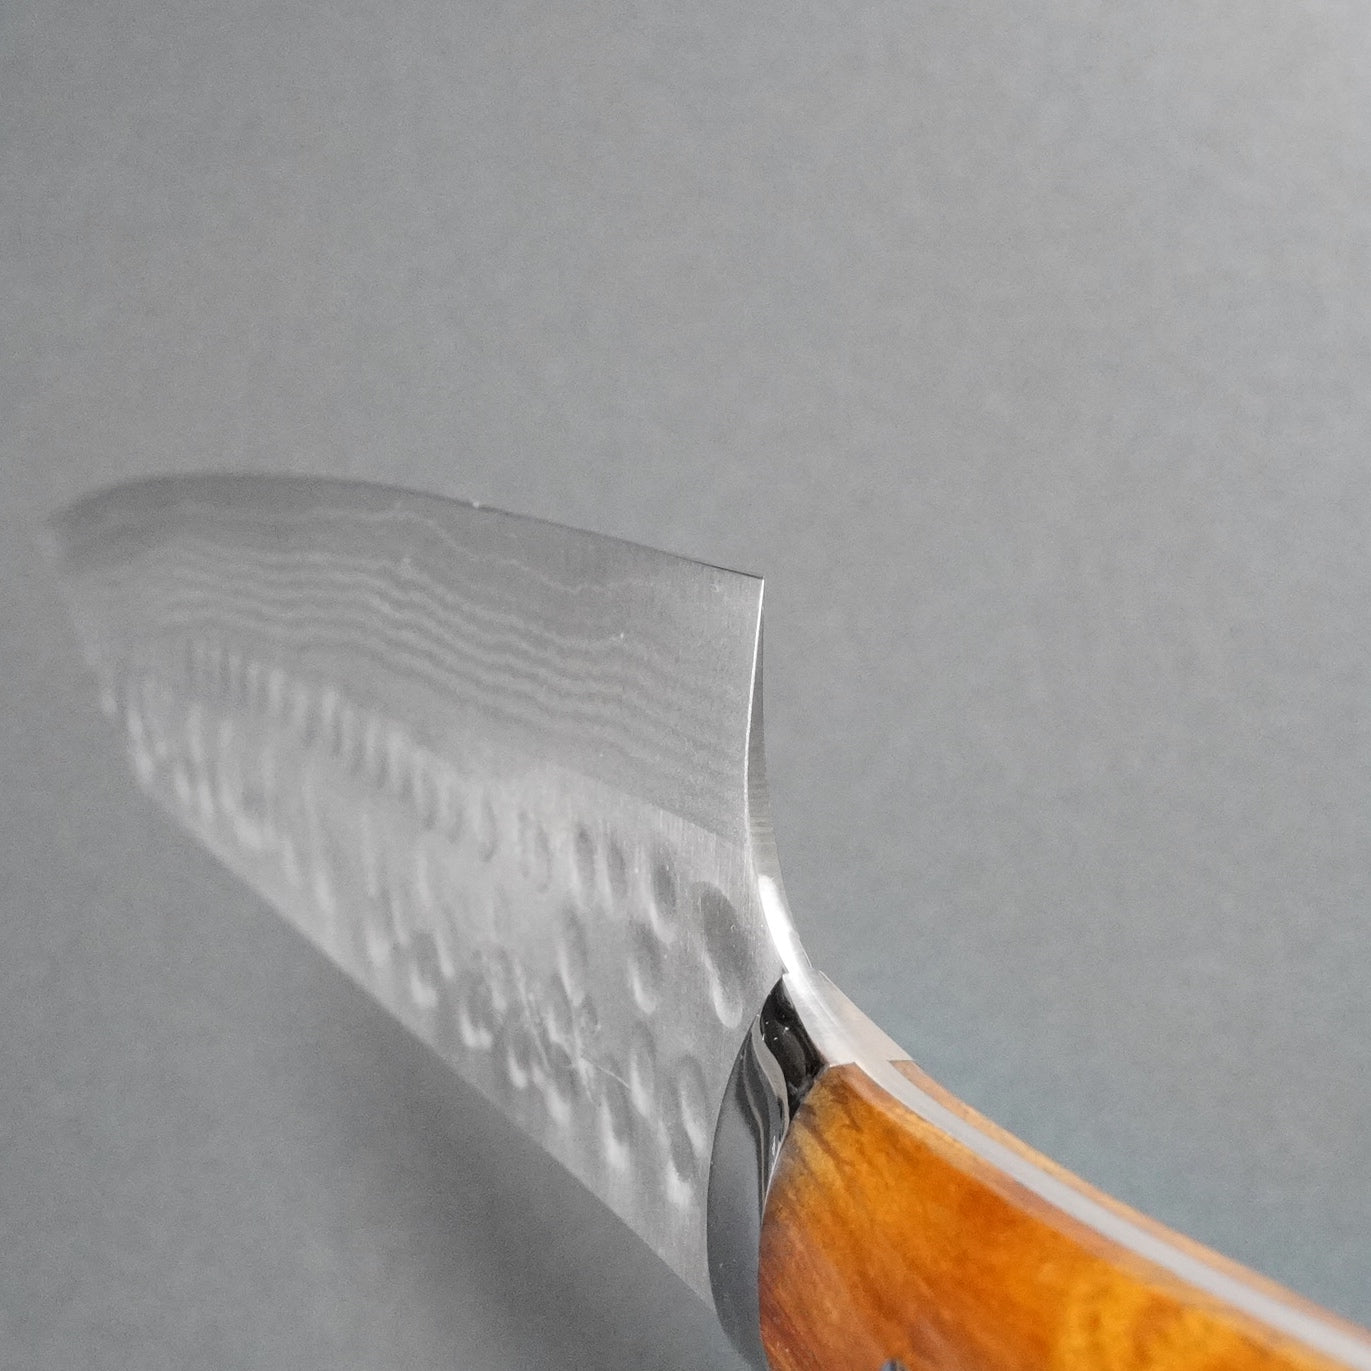 Japanese Full Tang Chef Cooking Knives – HAND FORGED KNIFE